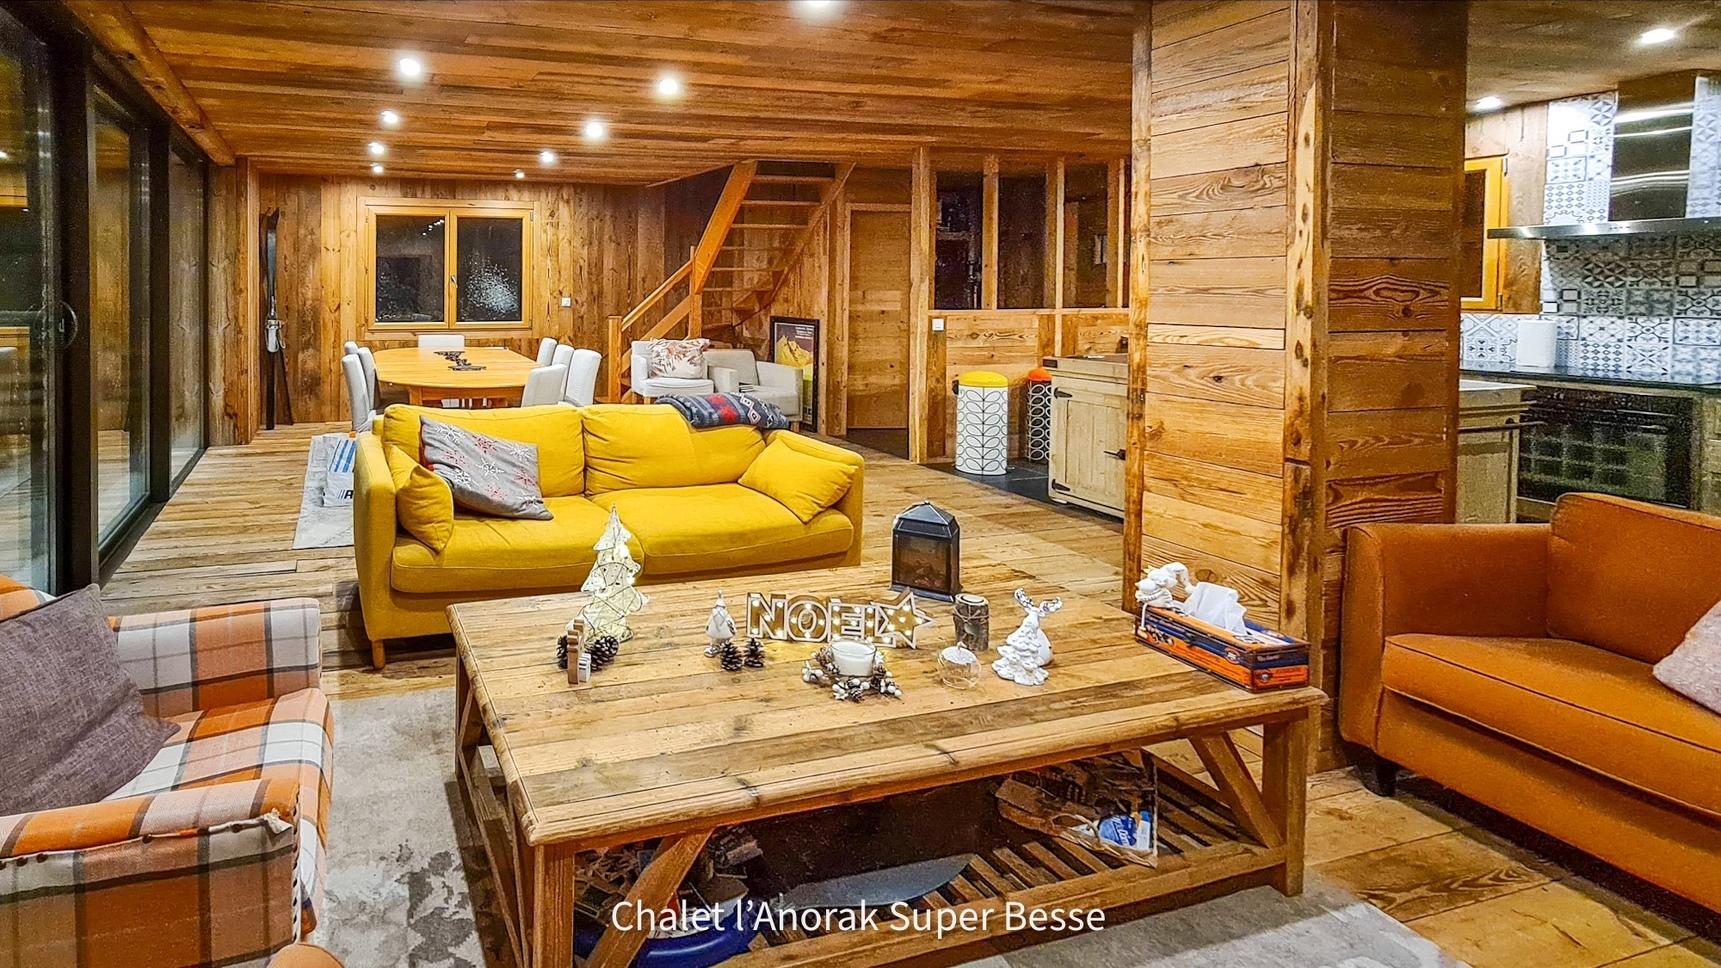 Chalet l'Anorak in Super Besse, the Chalet Lounge and the living room table